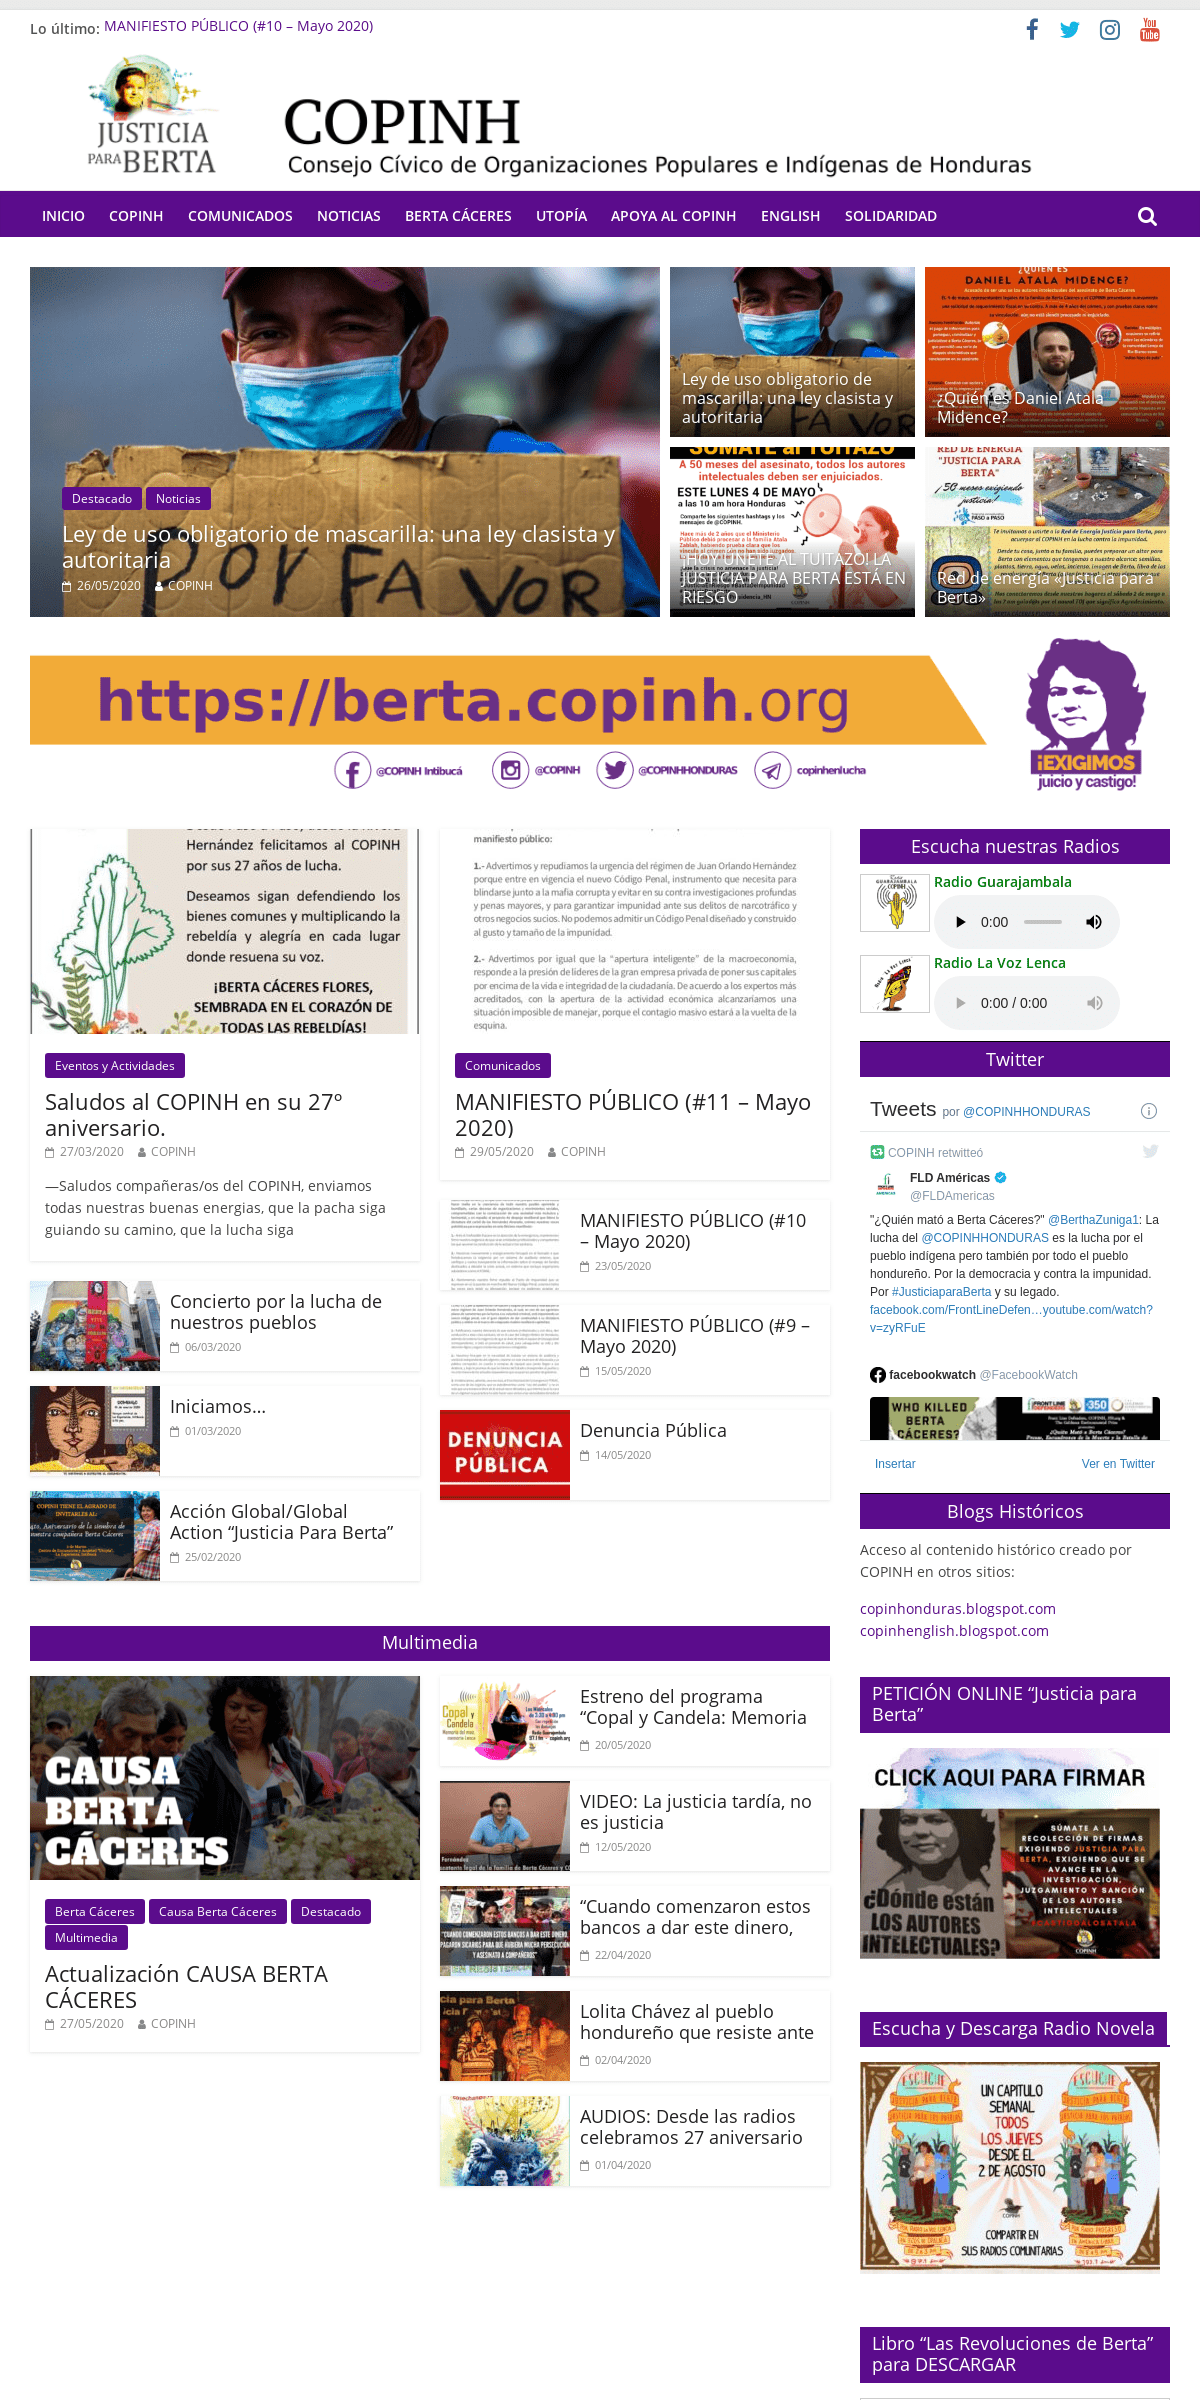 A complete backup of copinh.org